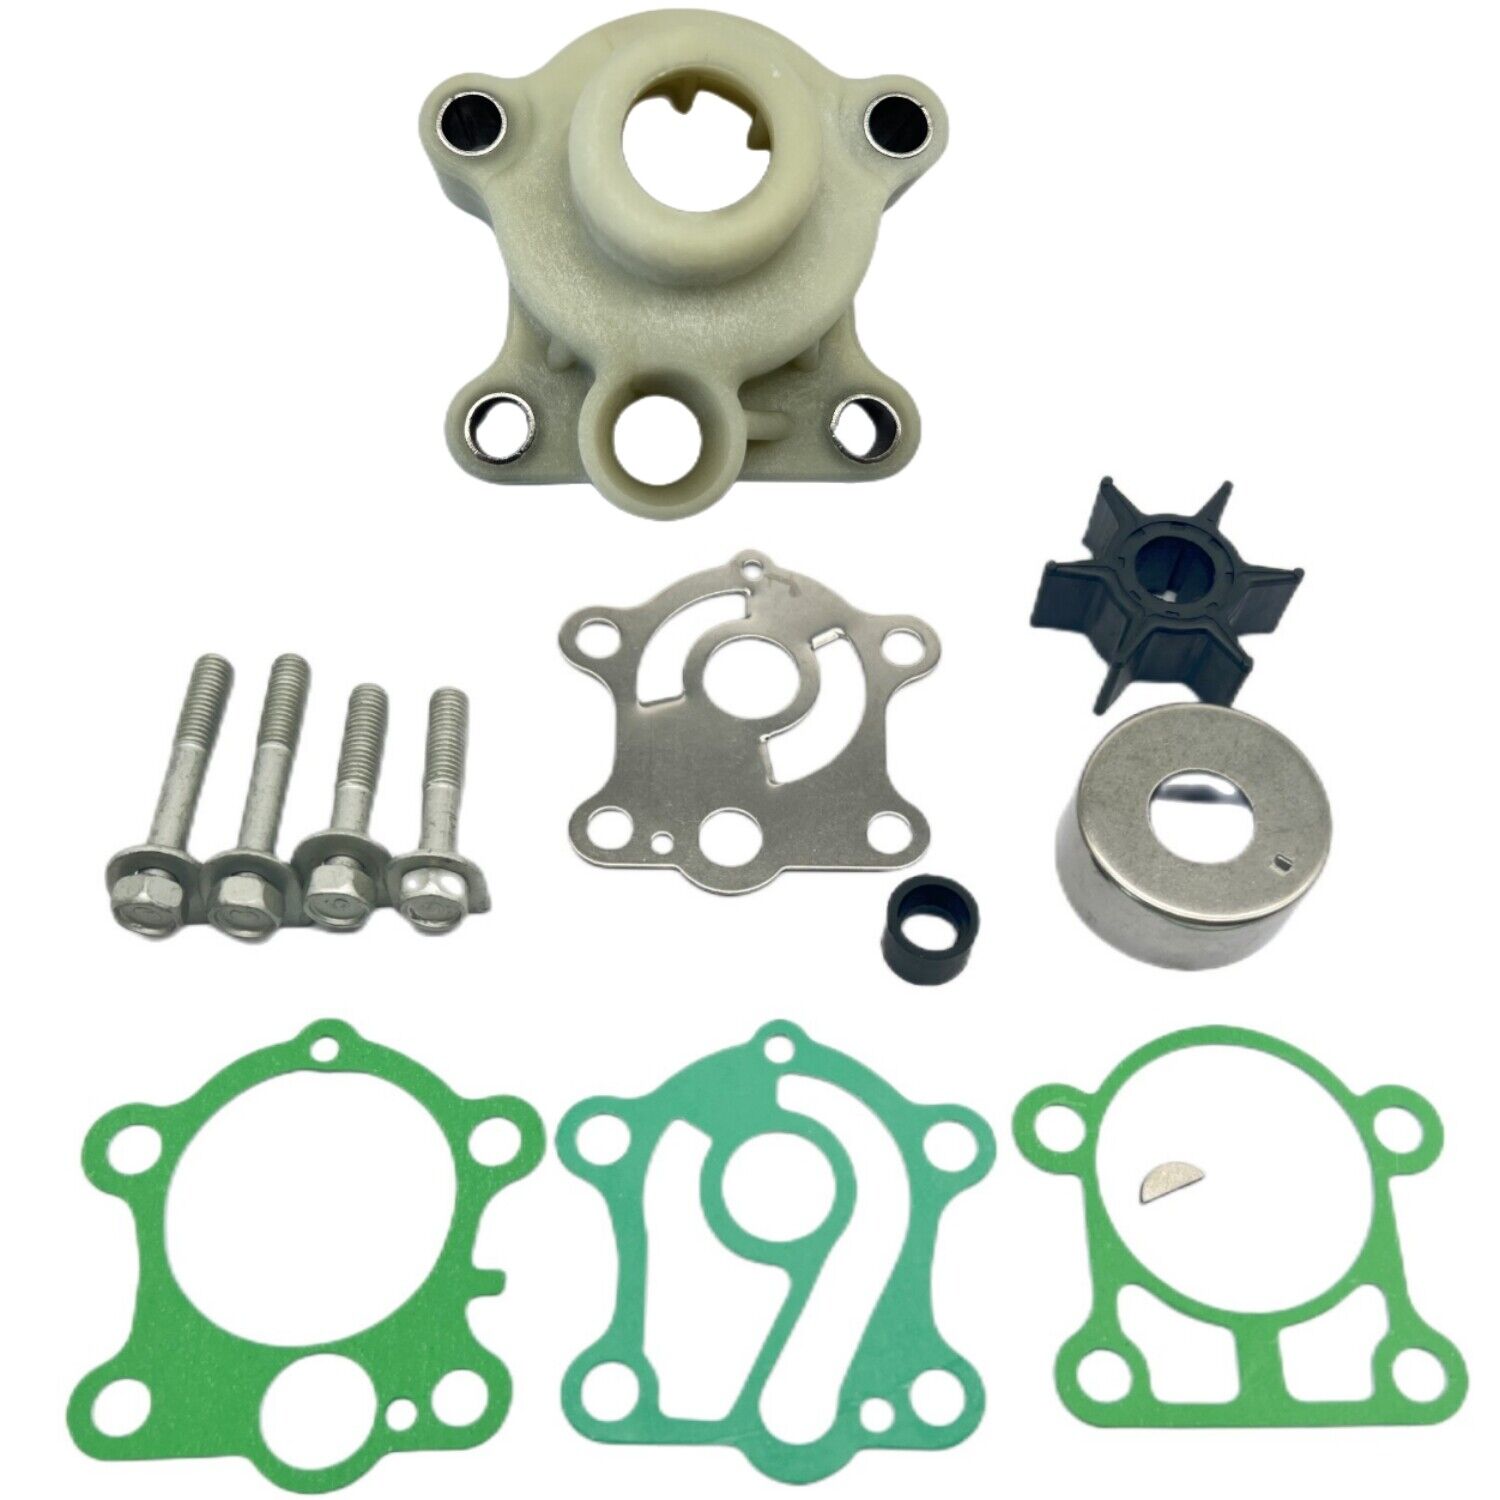 Yamaha Water Pump Impeller Service Kit for 2 Stroke 40hp 50hp Outboard 6H4-W0078